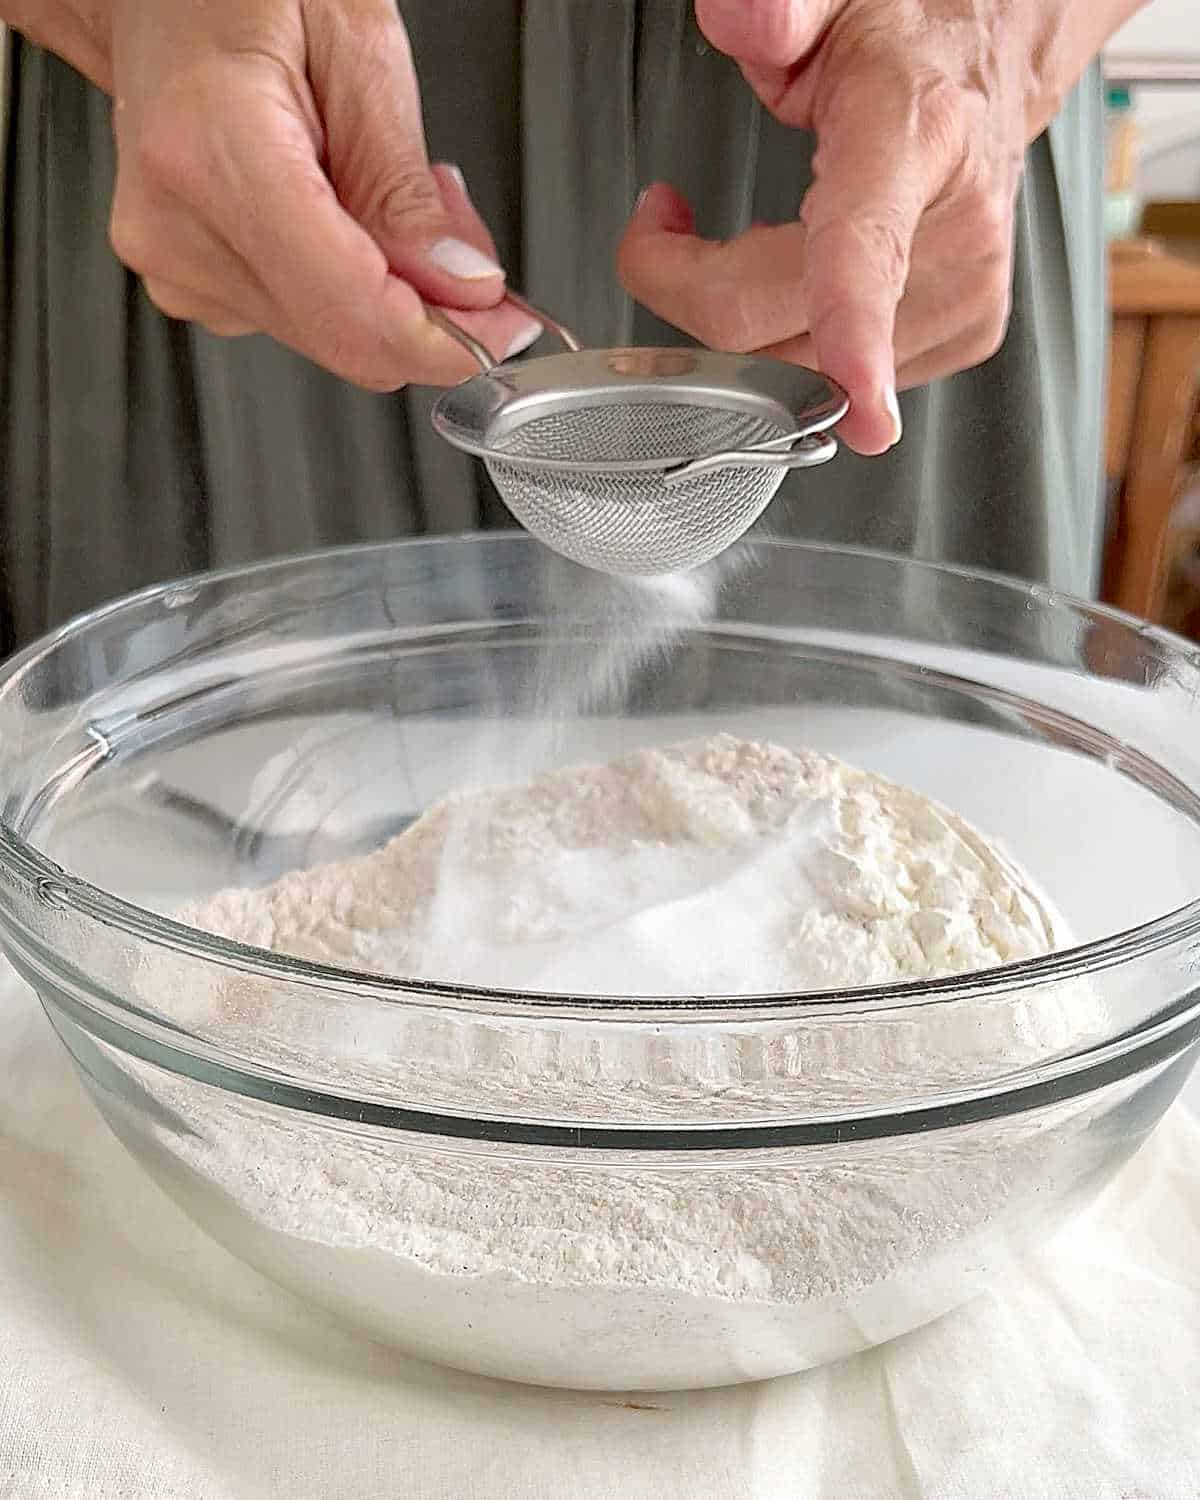 Sifting baking soda over whole wheat and white flours in a glass bowl. Green dress background.